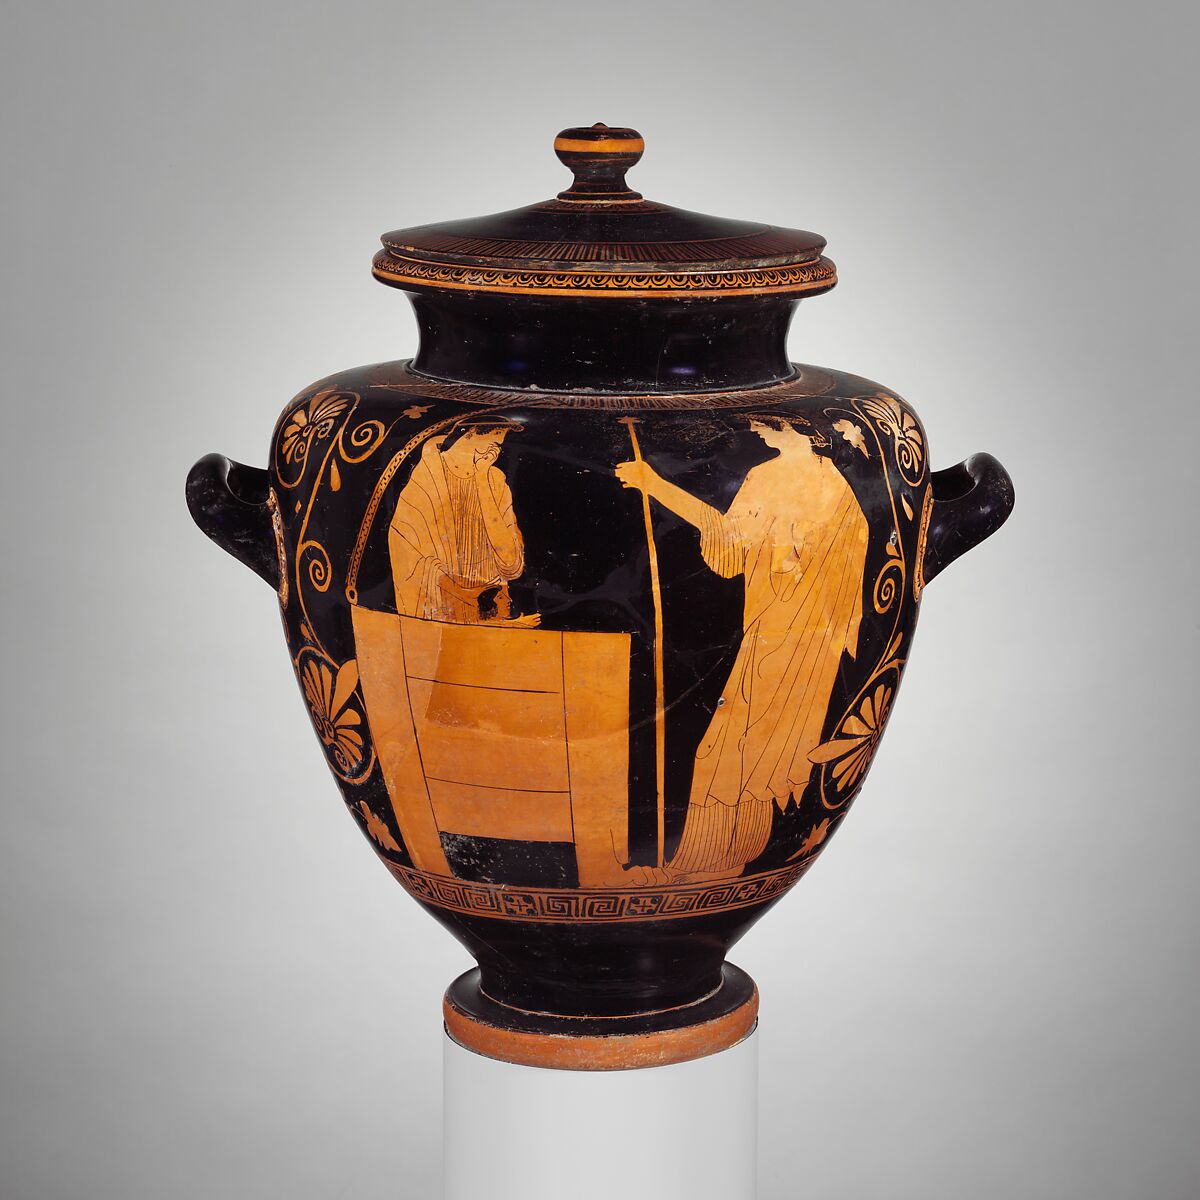 Terracotta stamnos with cover (jar), Attributed to the Deepdene Painter, Terracotta, Greek, Attic 